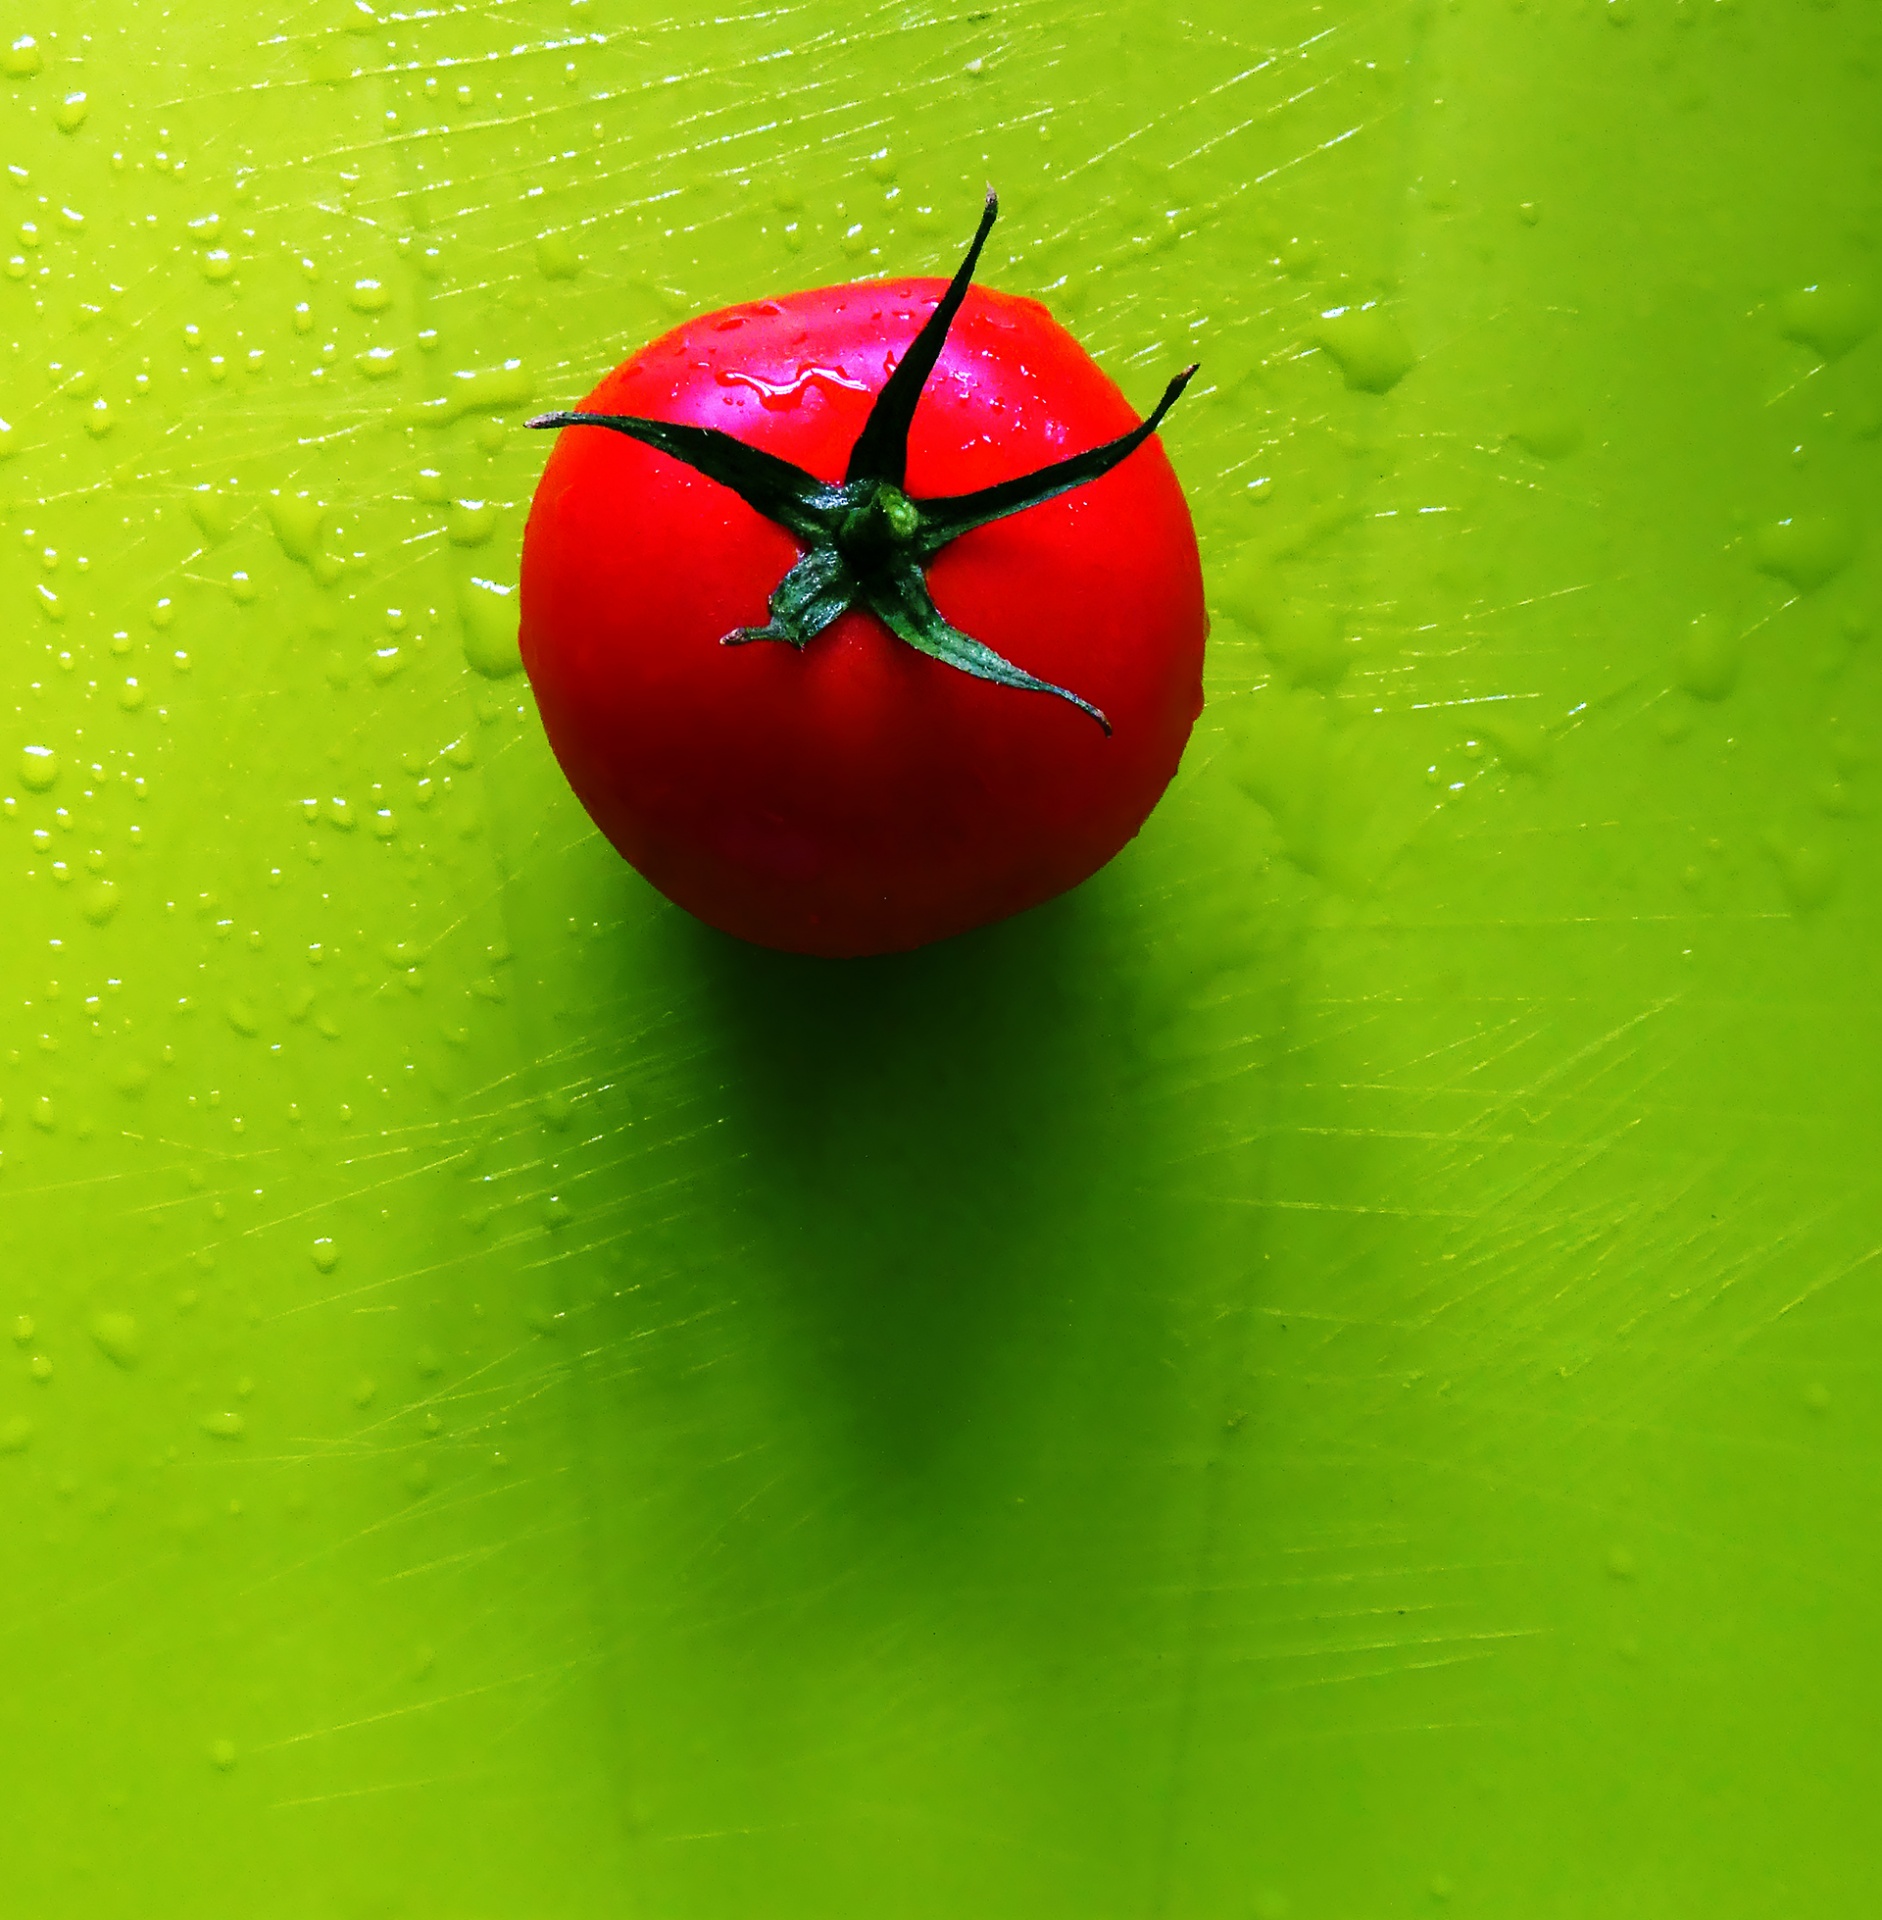 Red-tomato-with-chopping-board